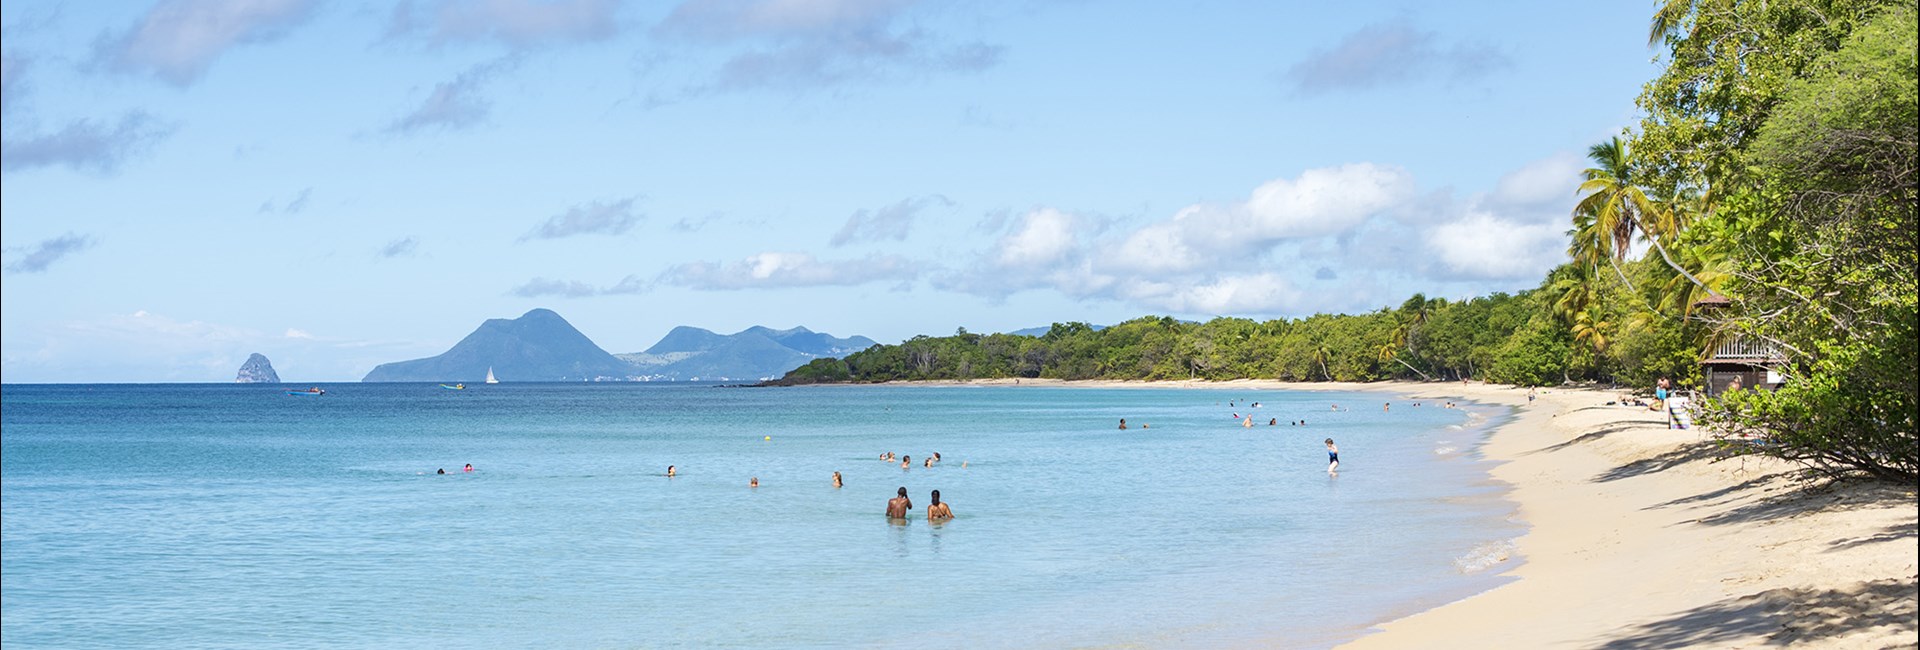 People swimming in the water at a narrow tropical beach lined with tall palm trees